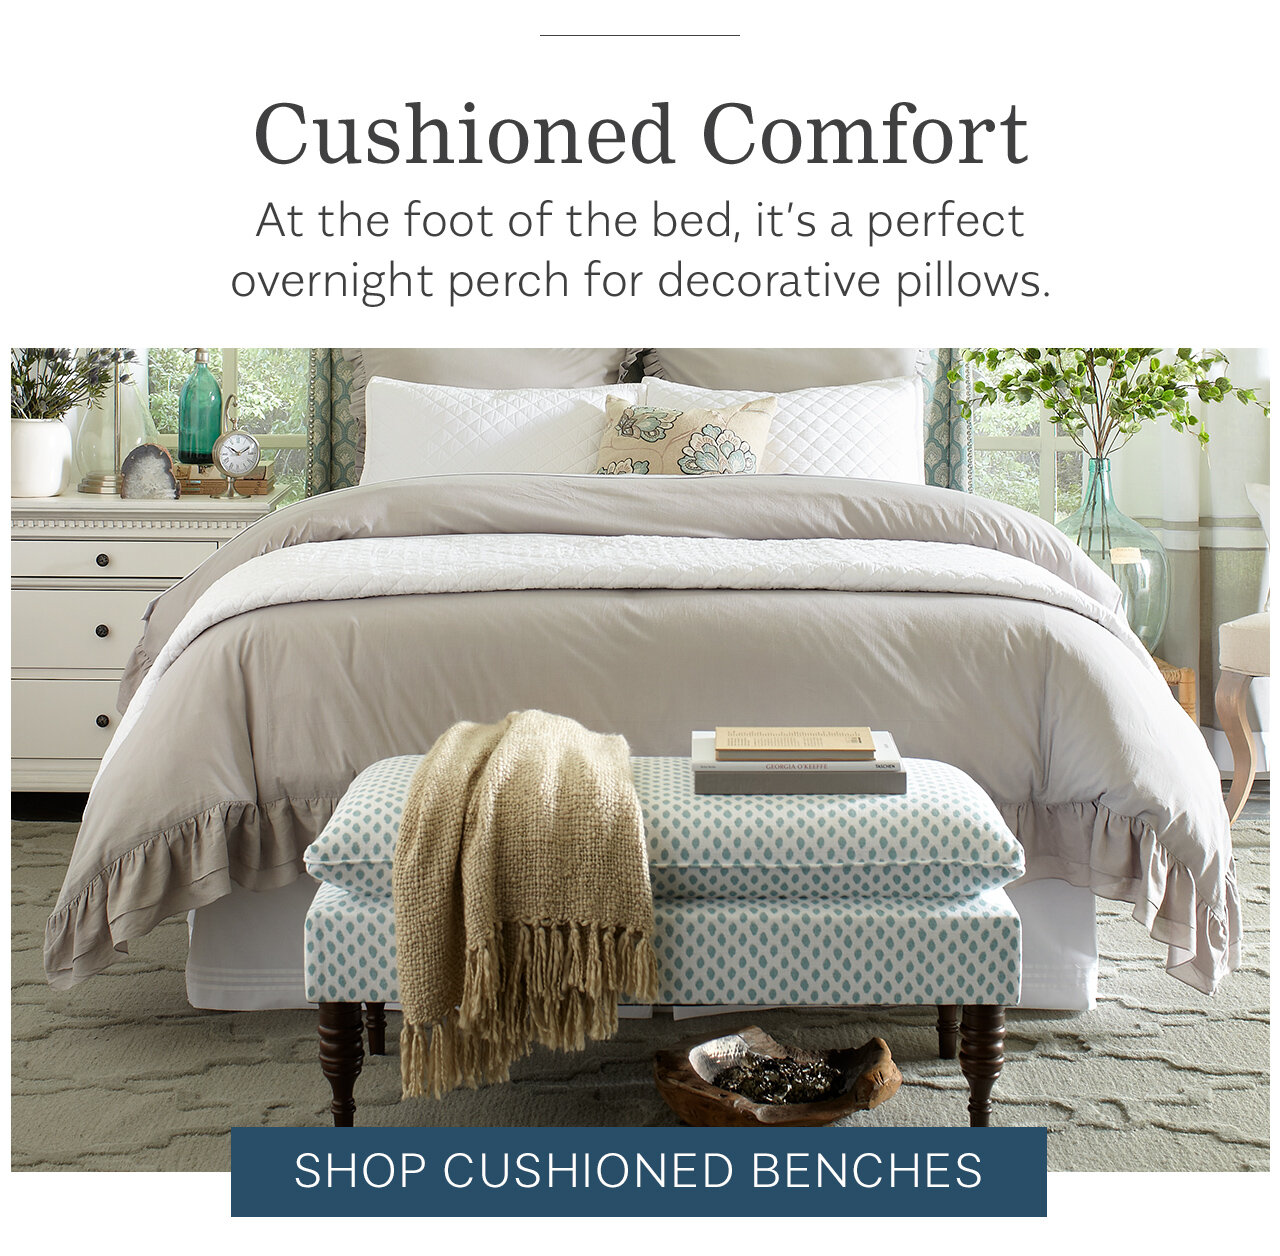 Cushioned Comfort At the foot of the bed, it's a perfect overnight perch for decorative pillows. SHOP CUSHIONED BENCHES 